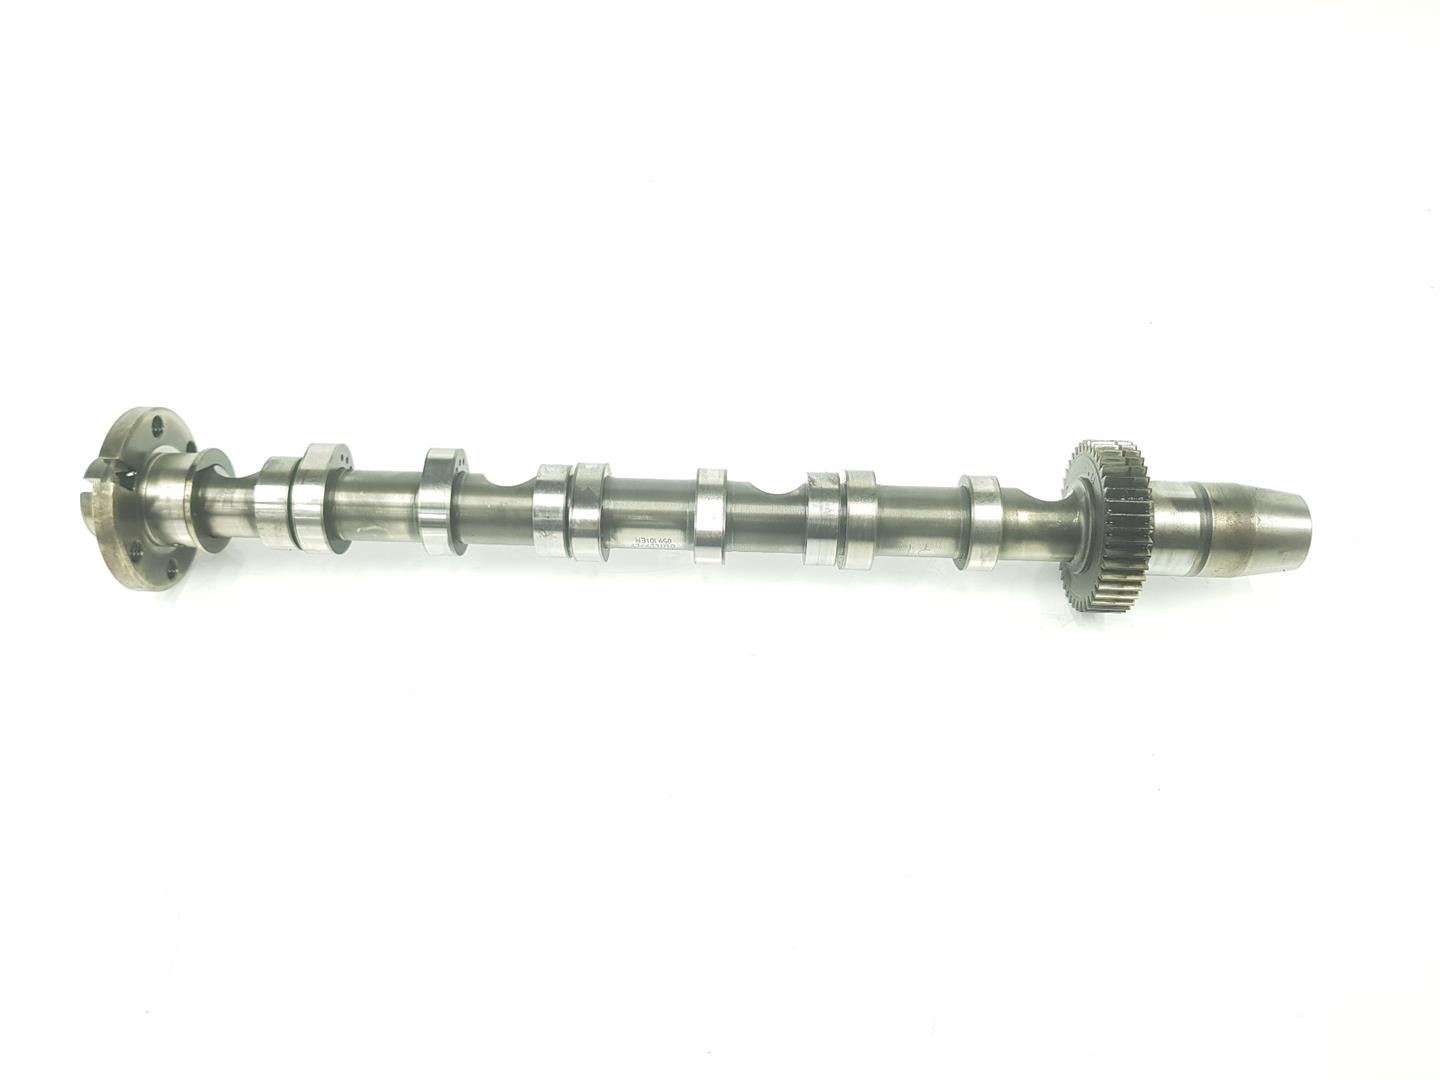 AUDI A6 C6/4F (2004-2011) Exhaust Camshaft 059109022BE, 059109022BE 21675963